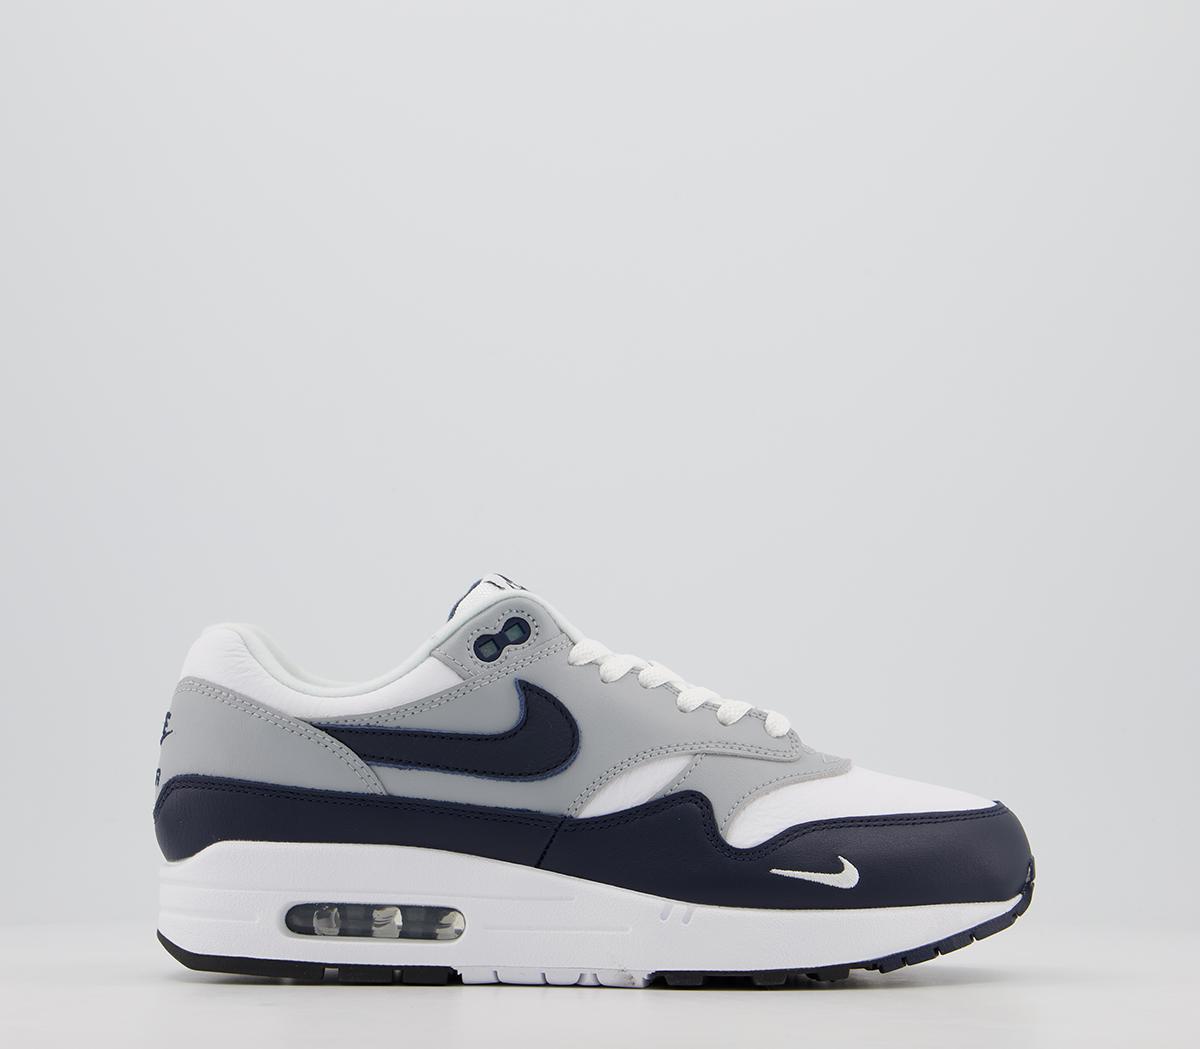 Nike Air Max 1 Trainers in White and Black